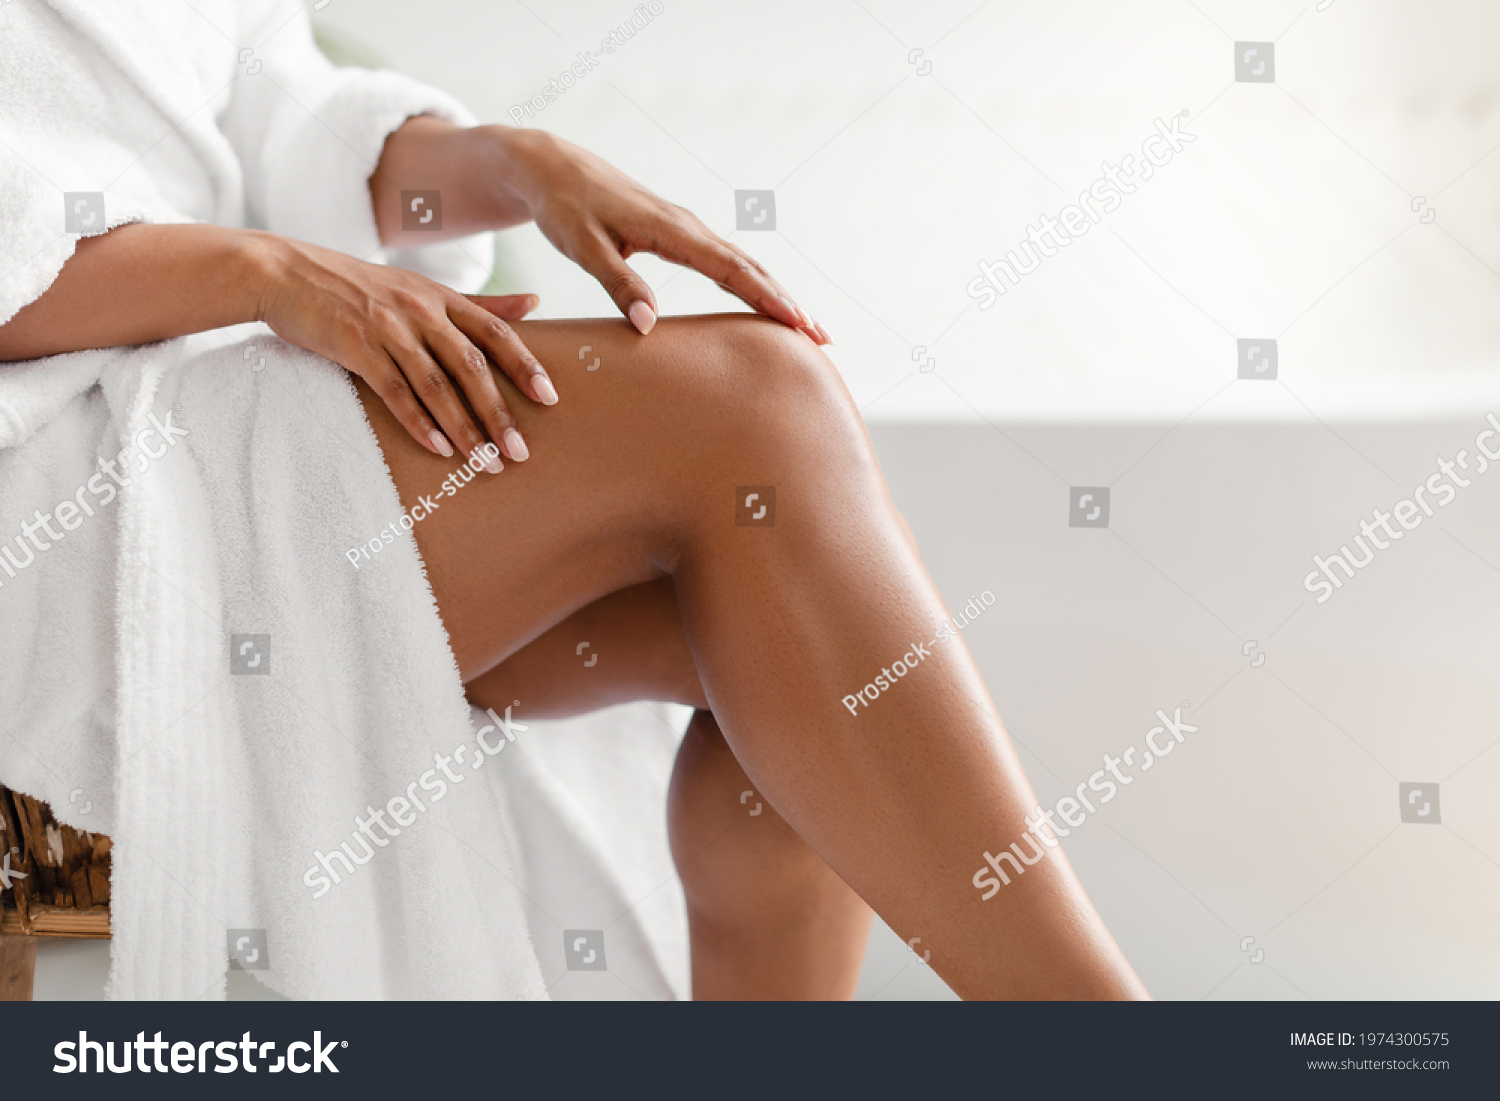 Side View Of Unrecognizable Black Lady Touching Perfect Smooth Legs After Depilation Posing Sitting On Chair In Bathroom At Home. Cropped Shot Of Female Legs. Hair Removal And Body Care #1974300575